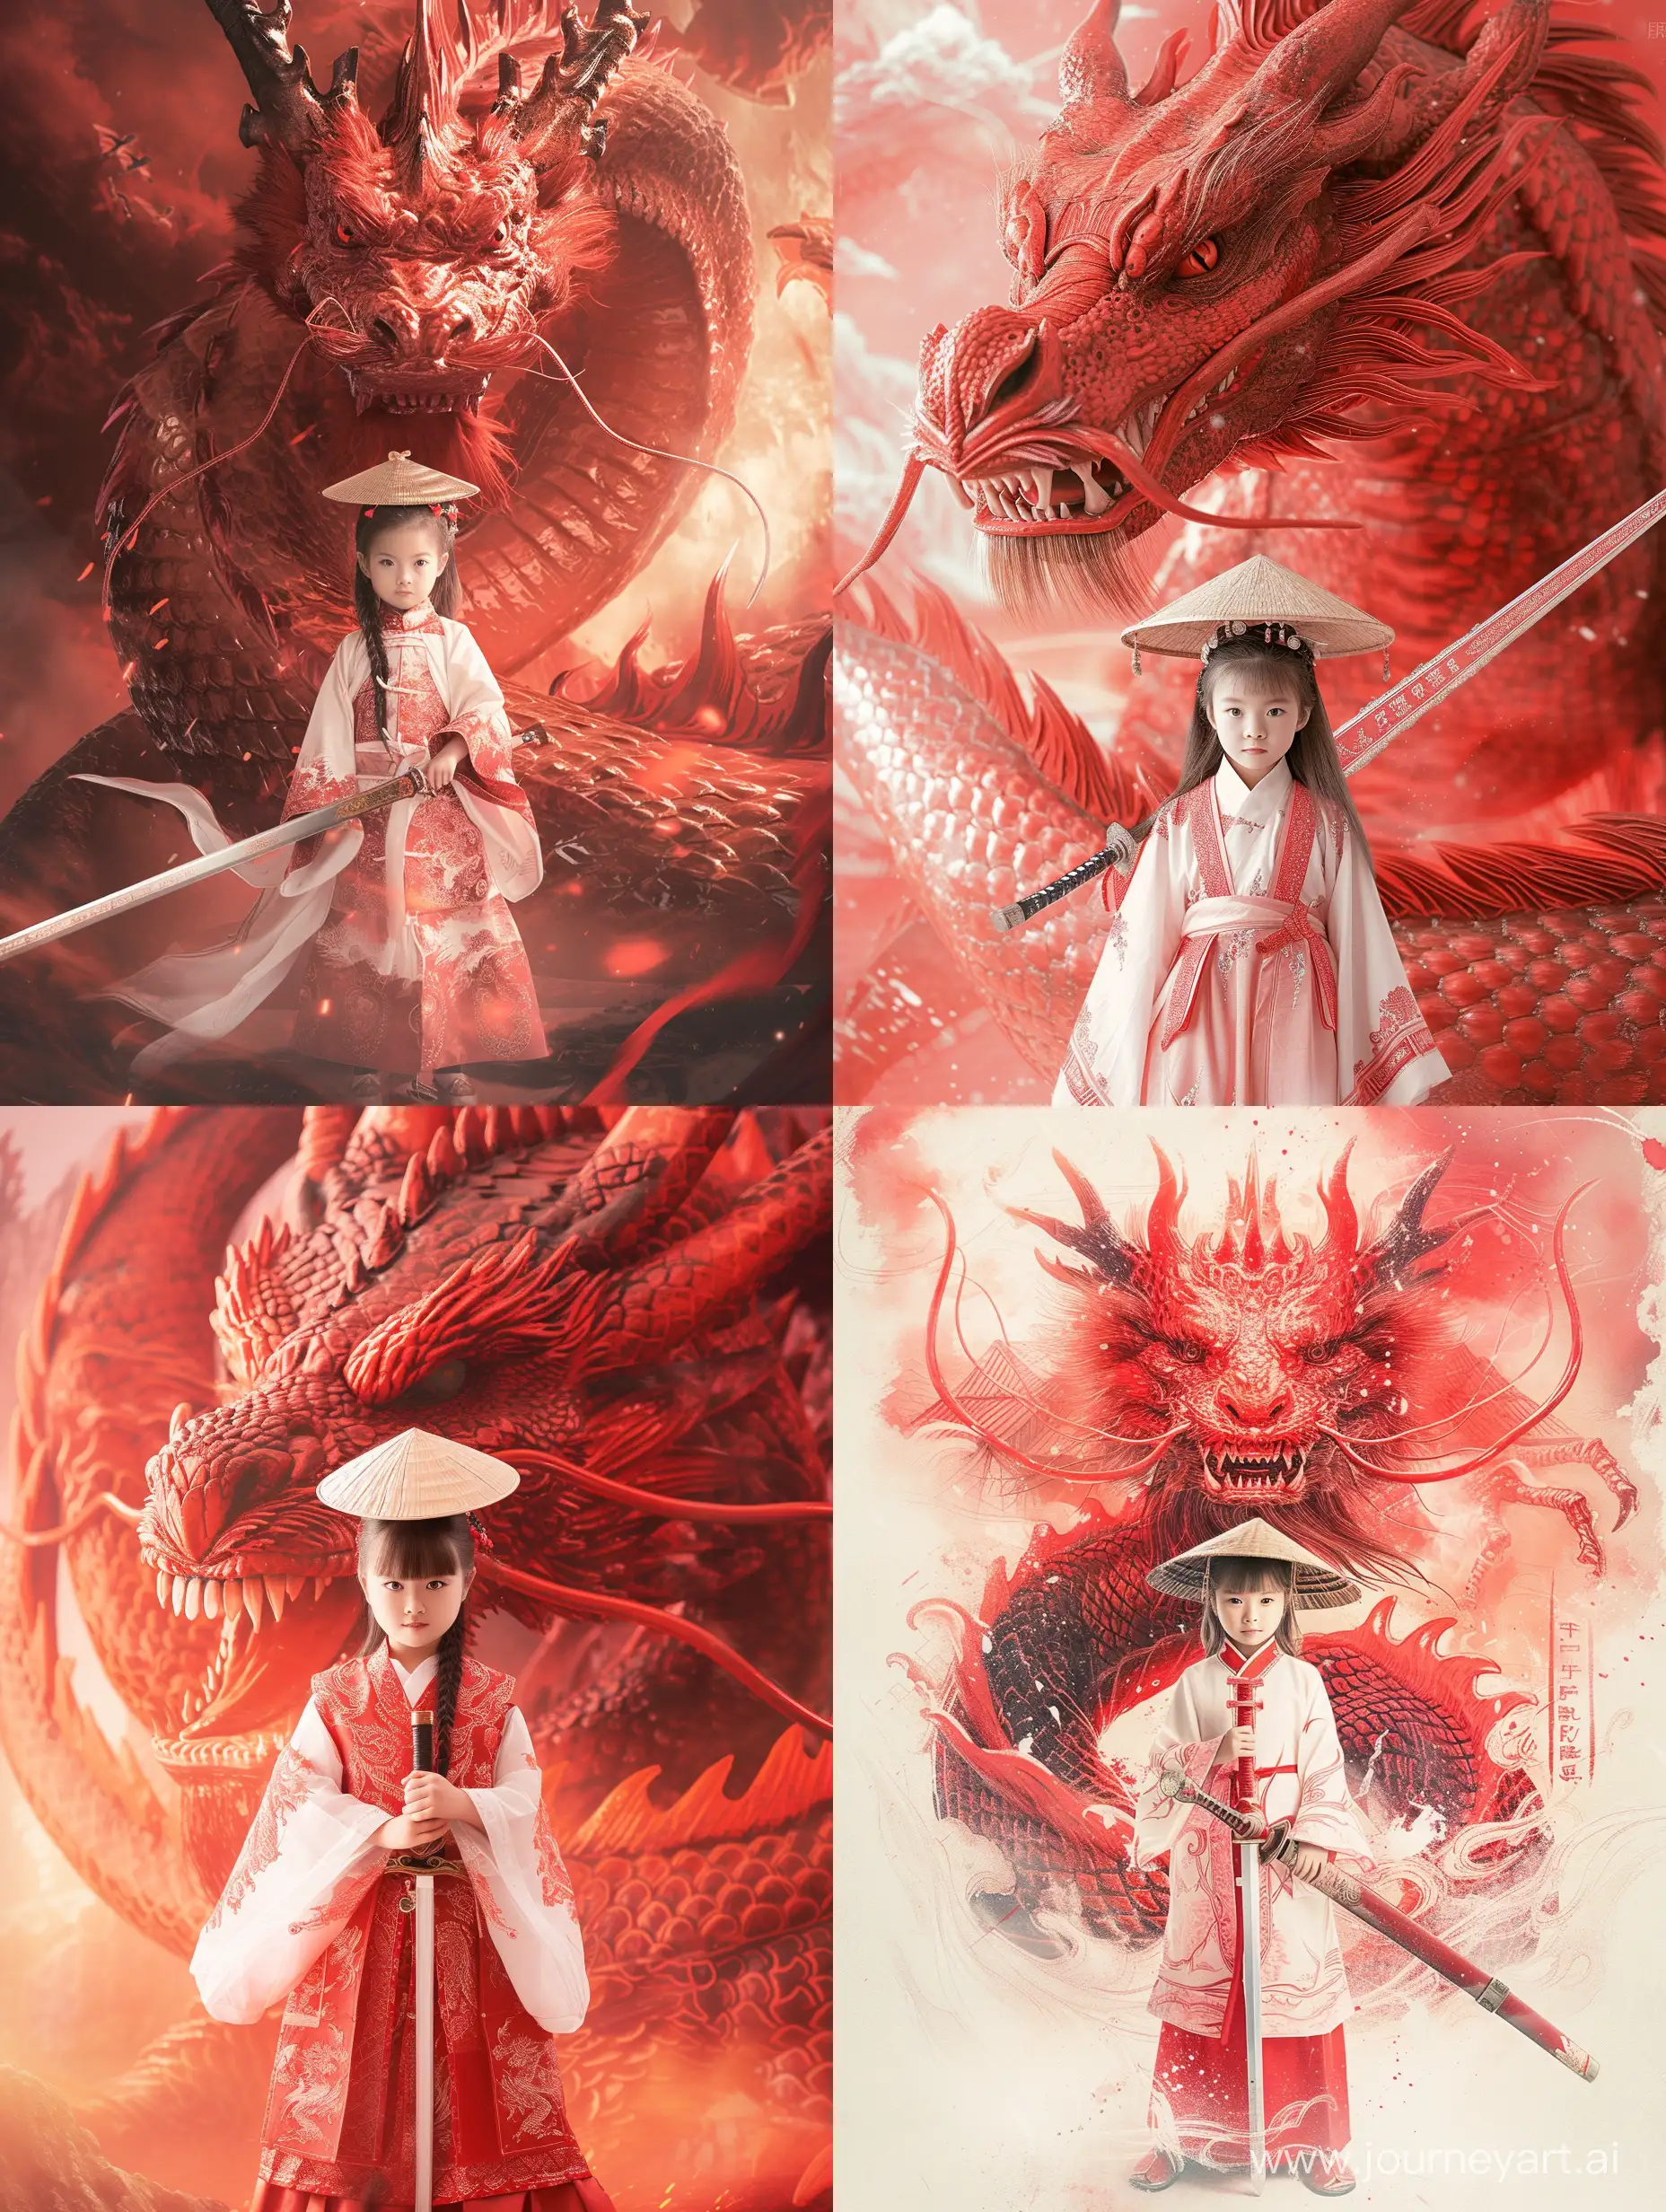 A 8-year-old girl, dressed in traditional Chinese attire stands in front of a dreamy red dragon, Giant Dragon, The primary color is red.wielding a sword, wearing a conical hat, with a handsome posture. The image includes front-facing,half-body, and full-body shots. The picture style is inspired by the Three Kingdoms and the Northern and Southern Dynasties, blending elements of Japanese culture